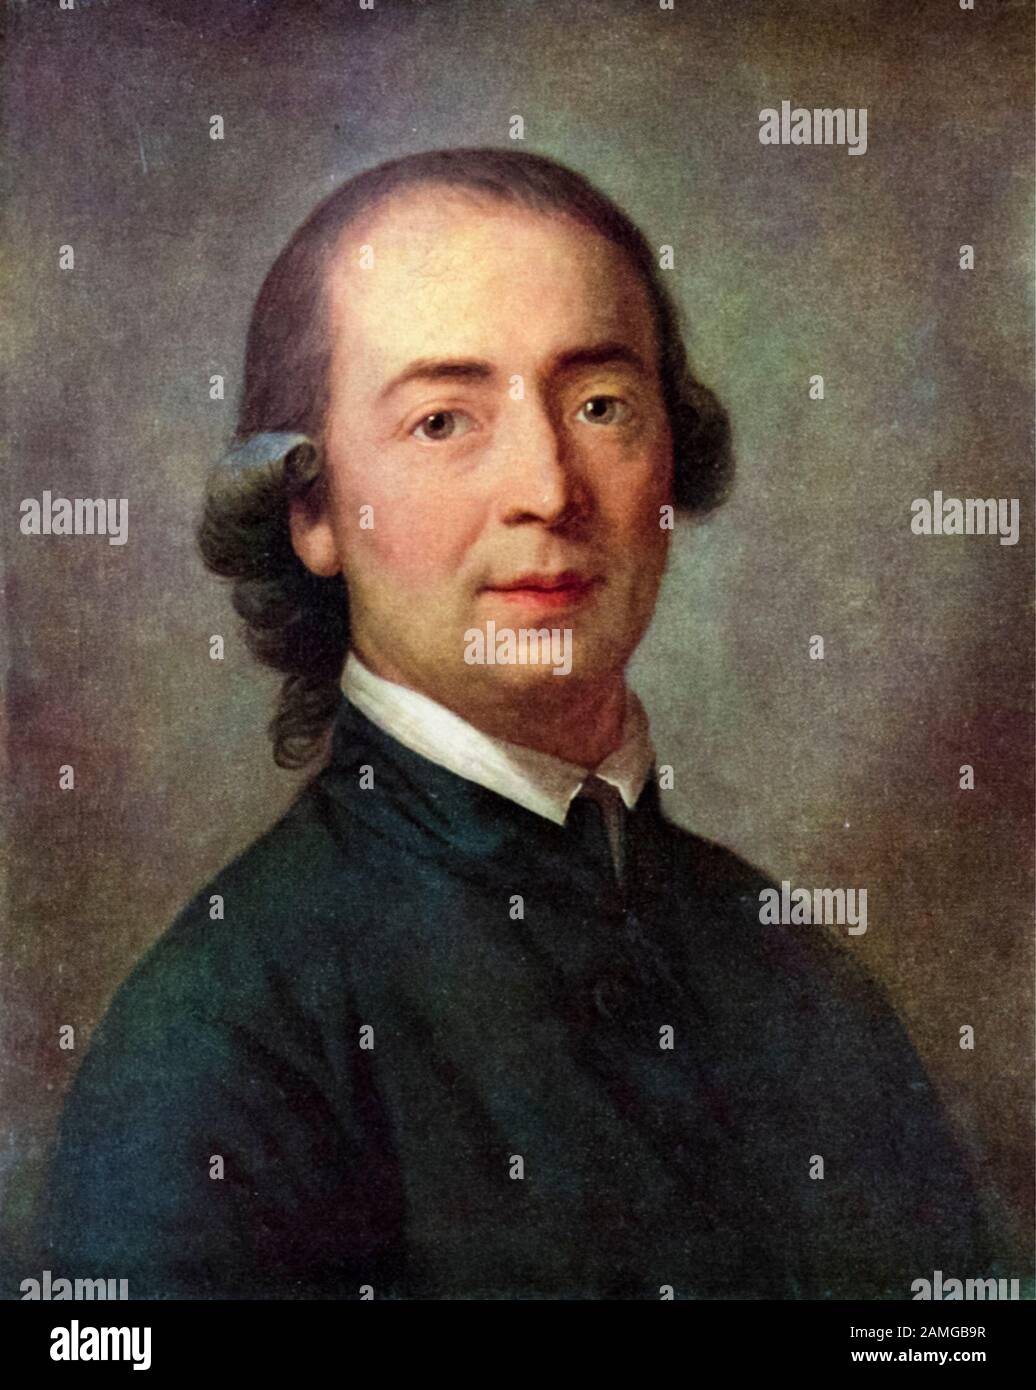 Frederic the Great (1712 - 1786), a portrait painting, circa 1780 Half  portrait in the style of the portraits by Anton Graff, 1781. The King is  wearing a plain blue uniform with